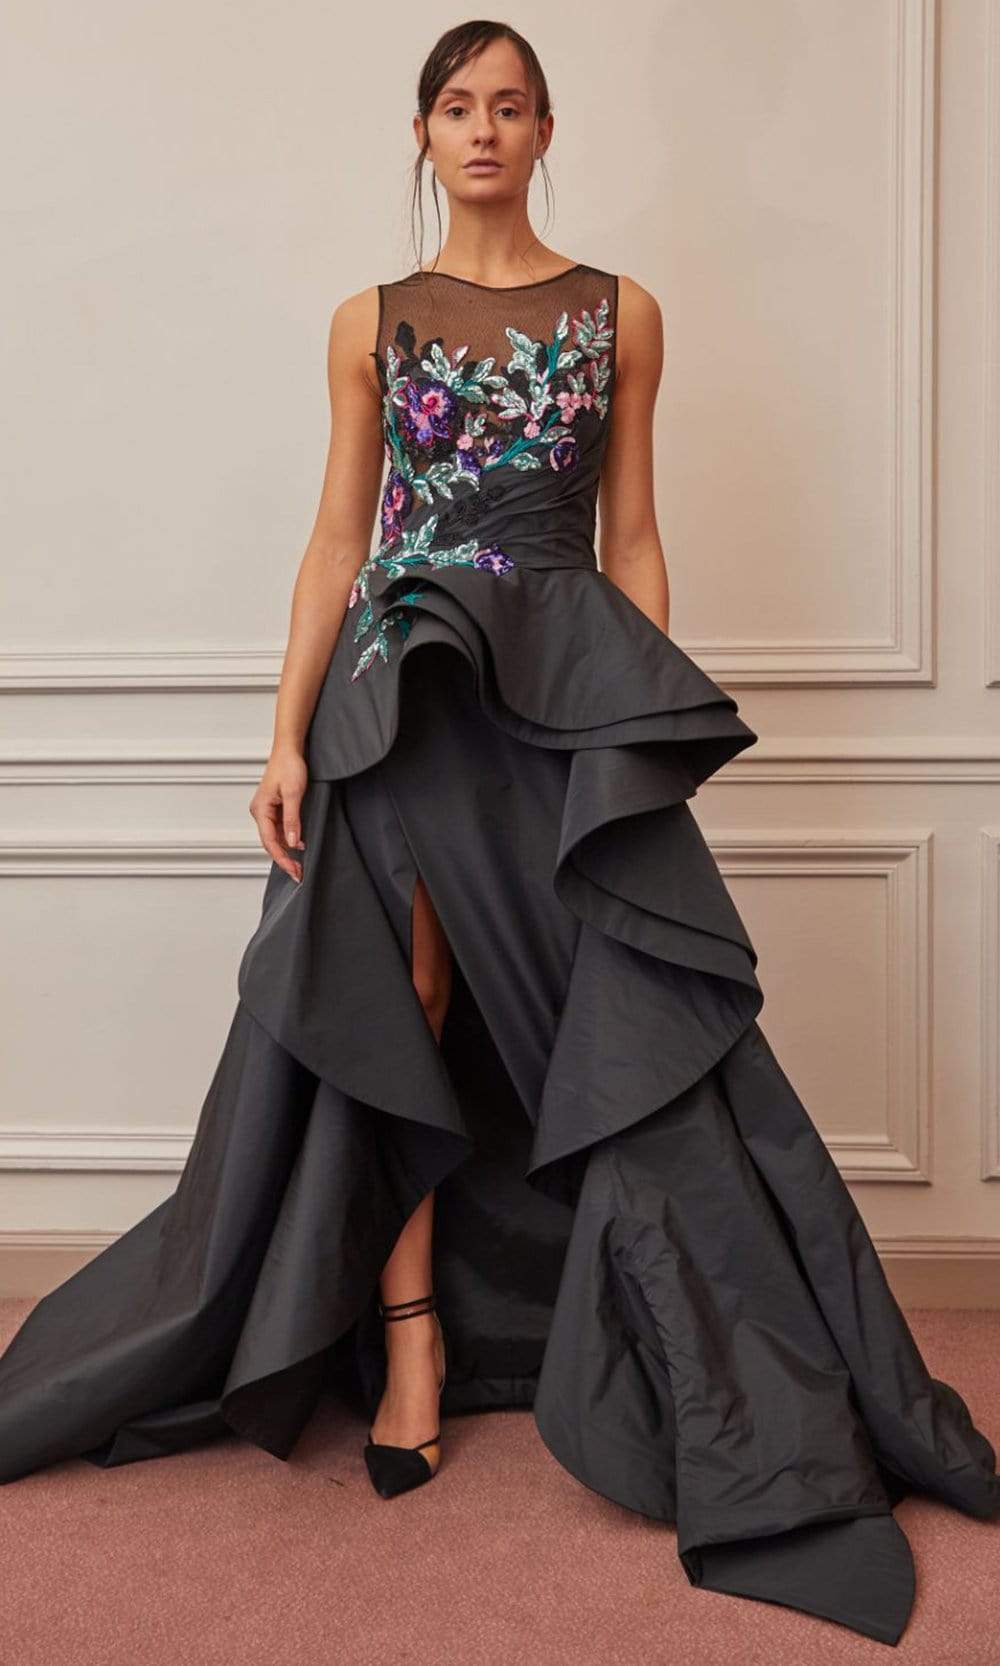 Image of Gatti Nolli Couture - OP-5360 Illusion Floral Bodice High Low Ballgown